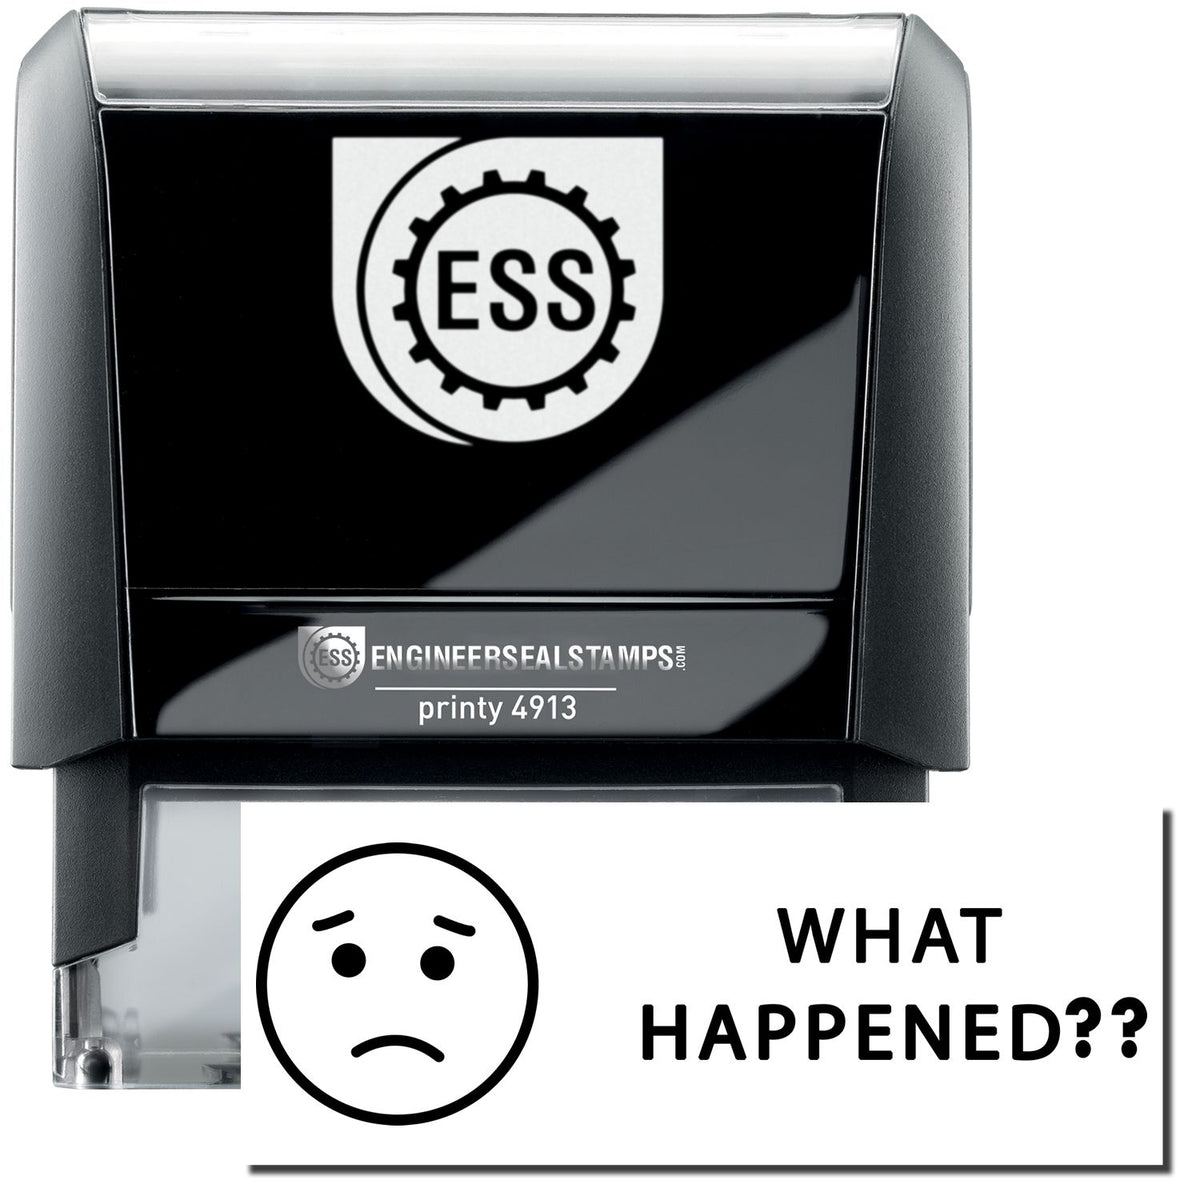 A self-inking stamp with a stamped image showing how the text &quot;WHAT HAPPENED??&quot; in a large font with an image of a sad face on the left side is displayed after stamping.